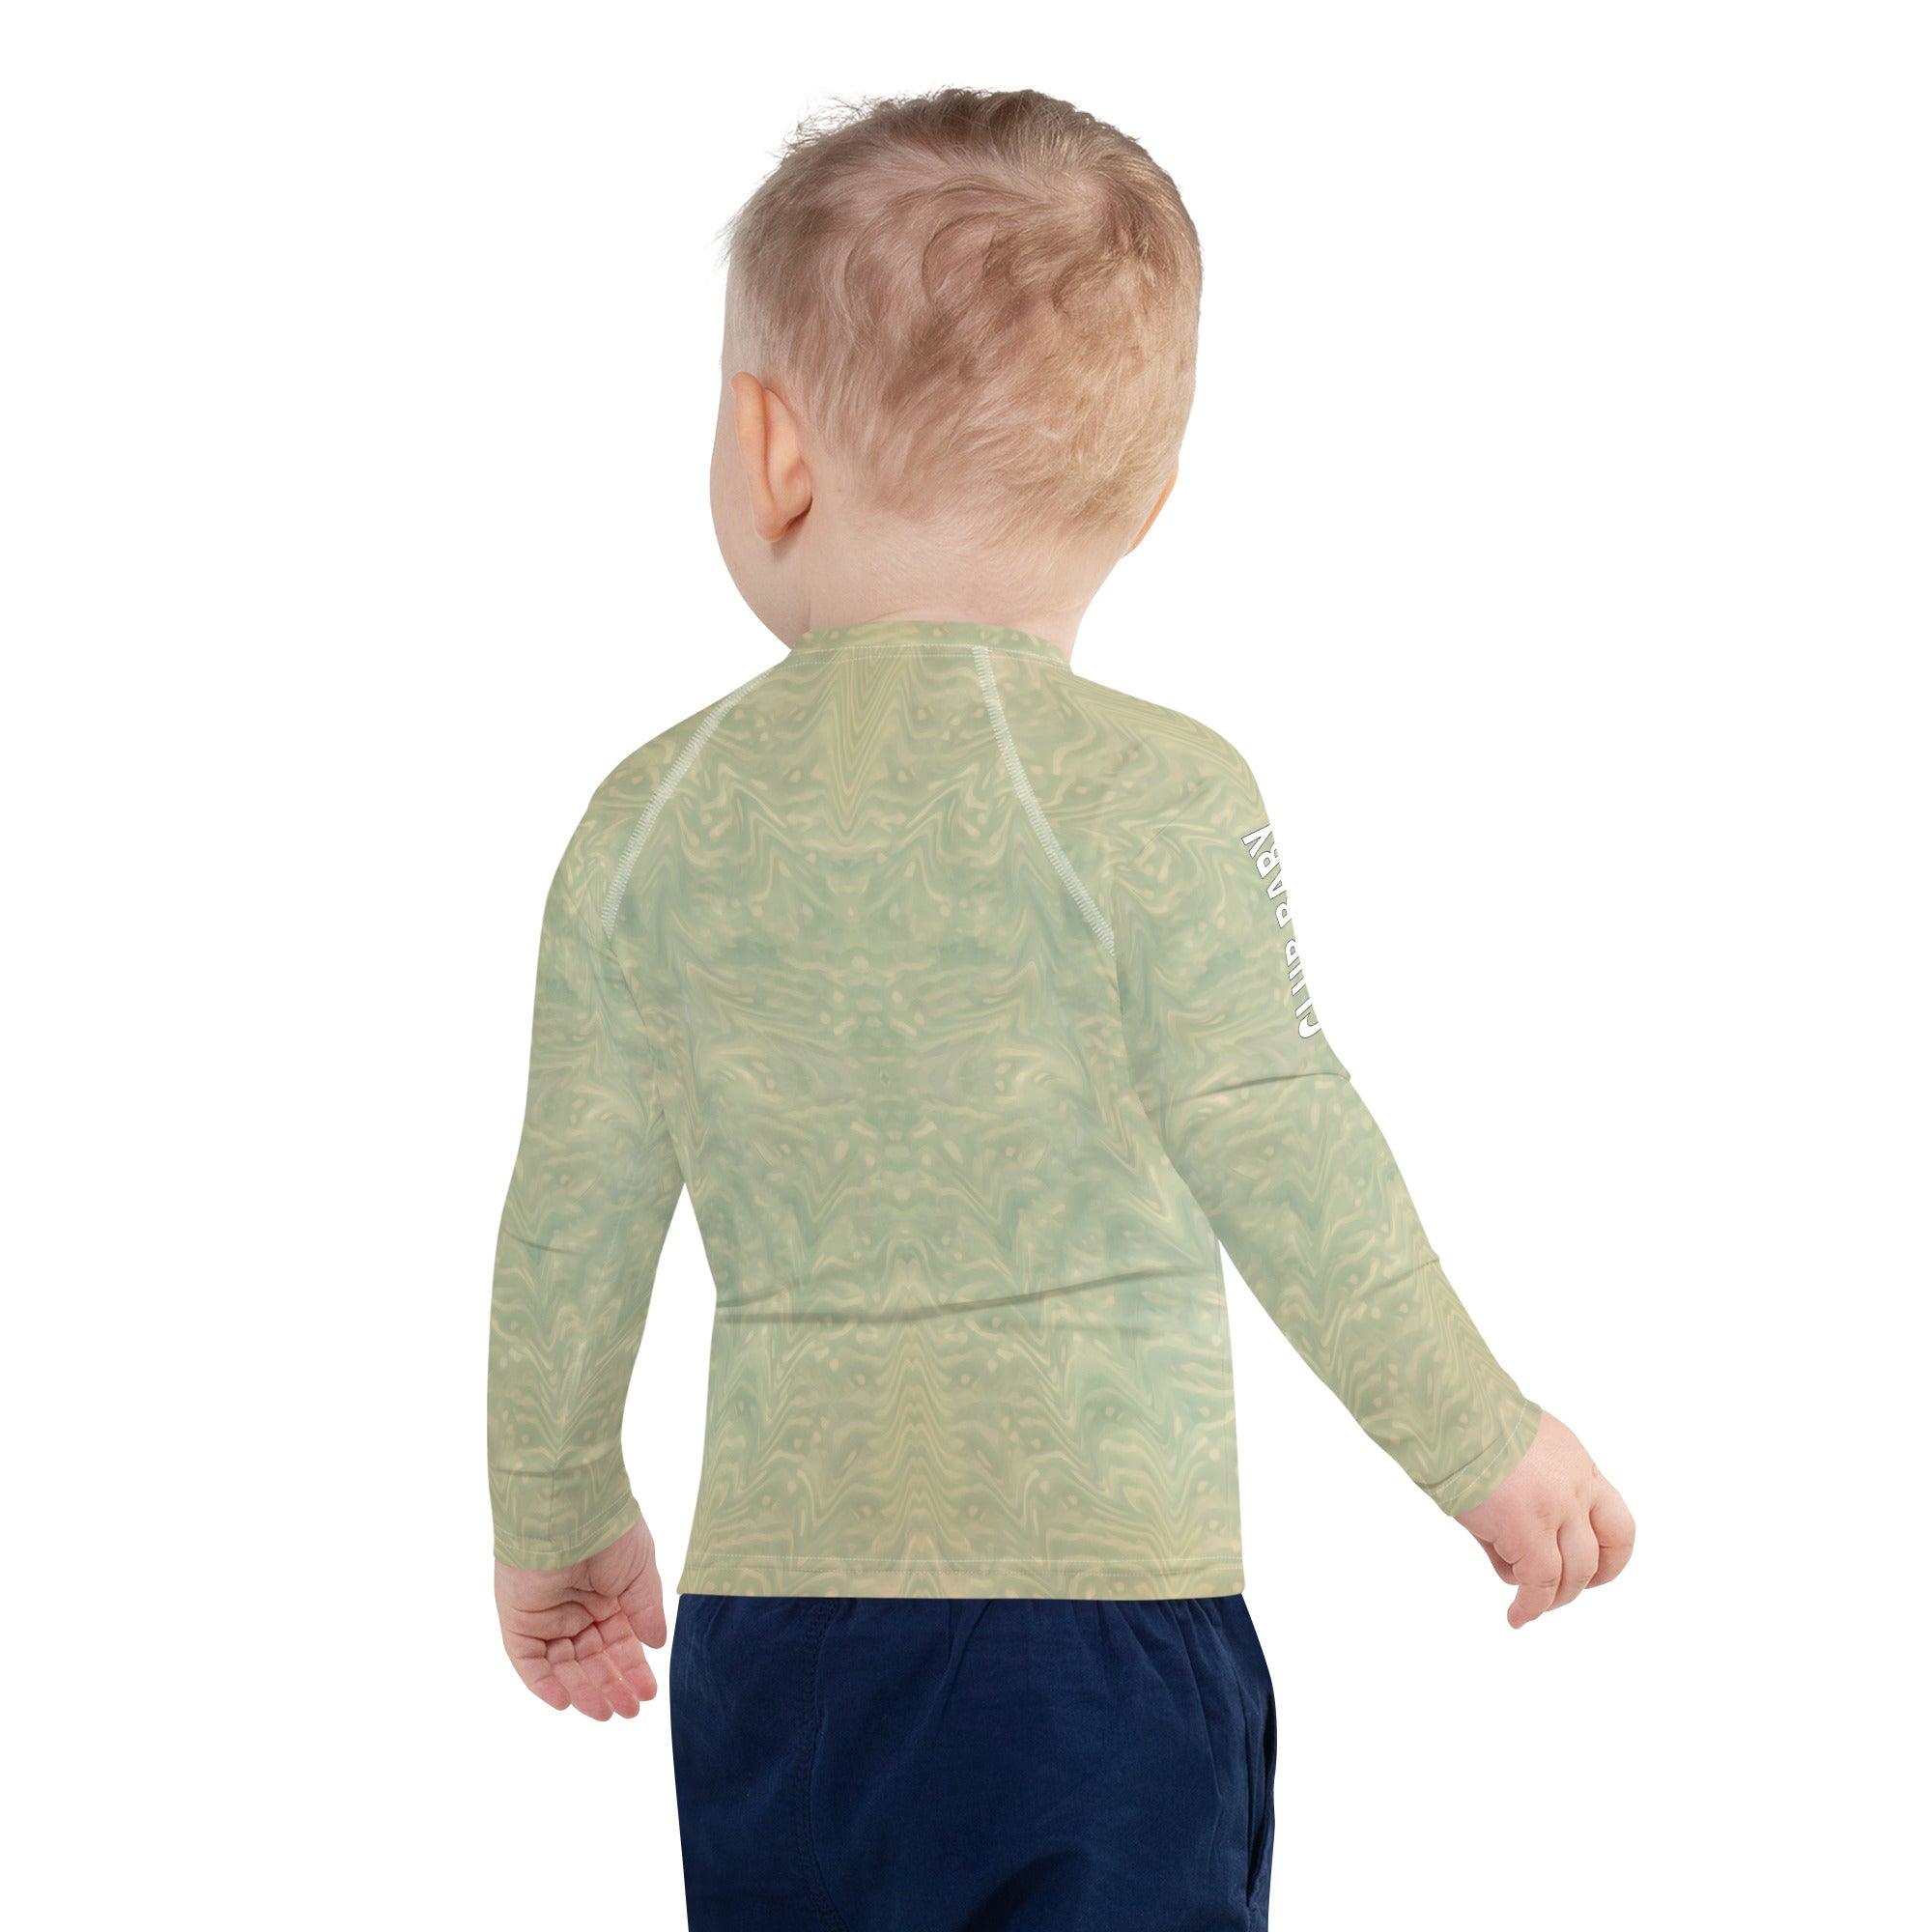 Close-up of CB6-18 Kids Rash Guard Material - High-Quality Sun Protection